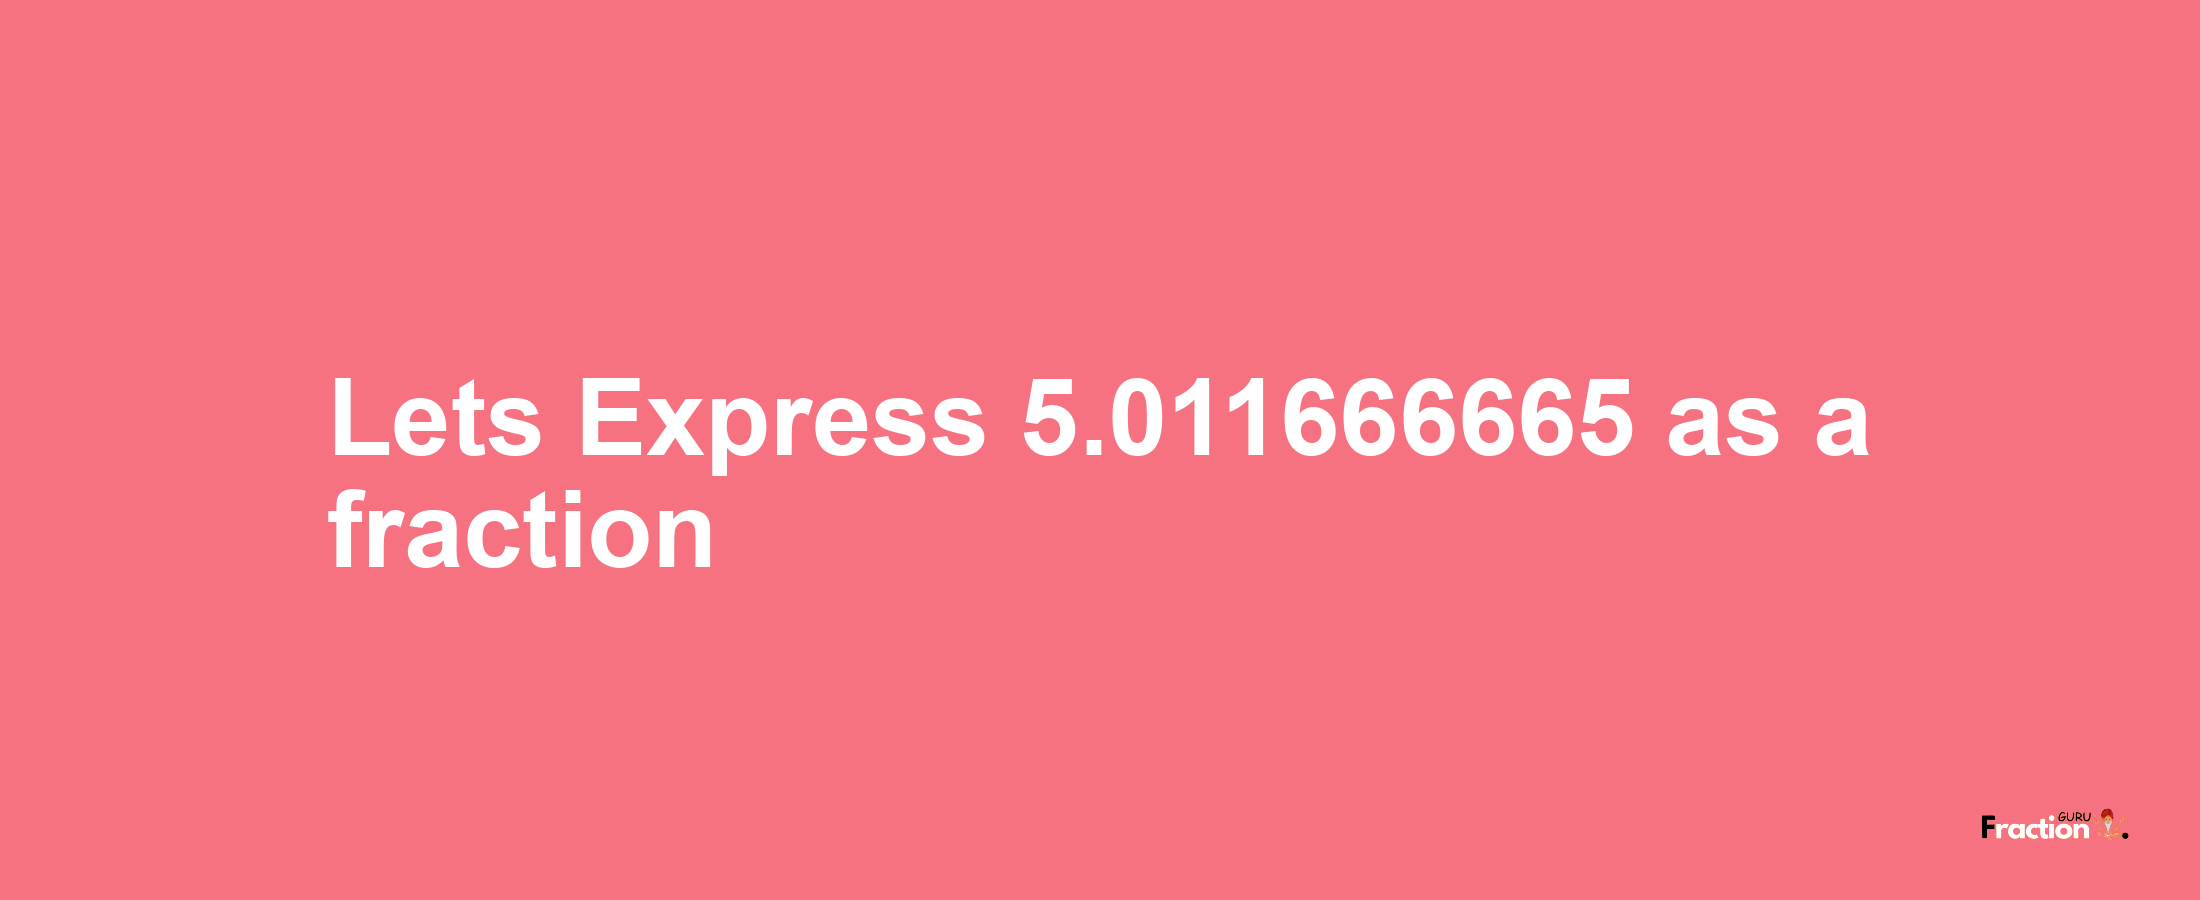 Lets Express 5.011666665 as afraction